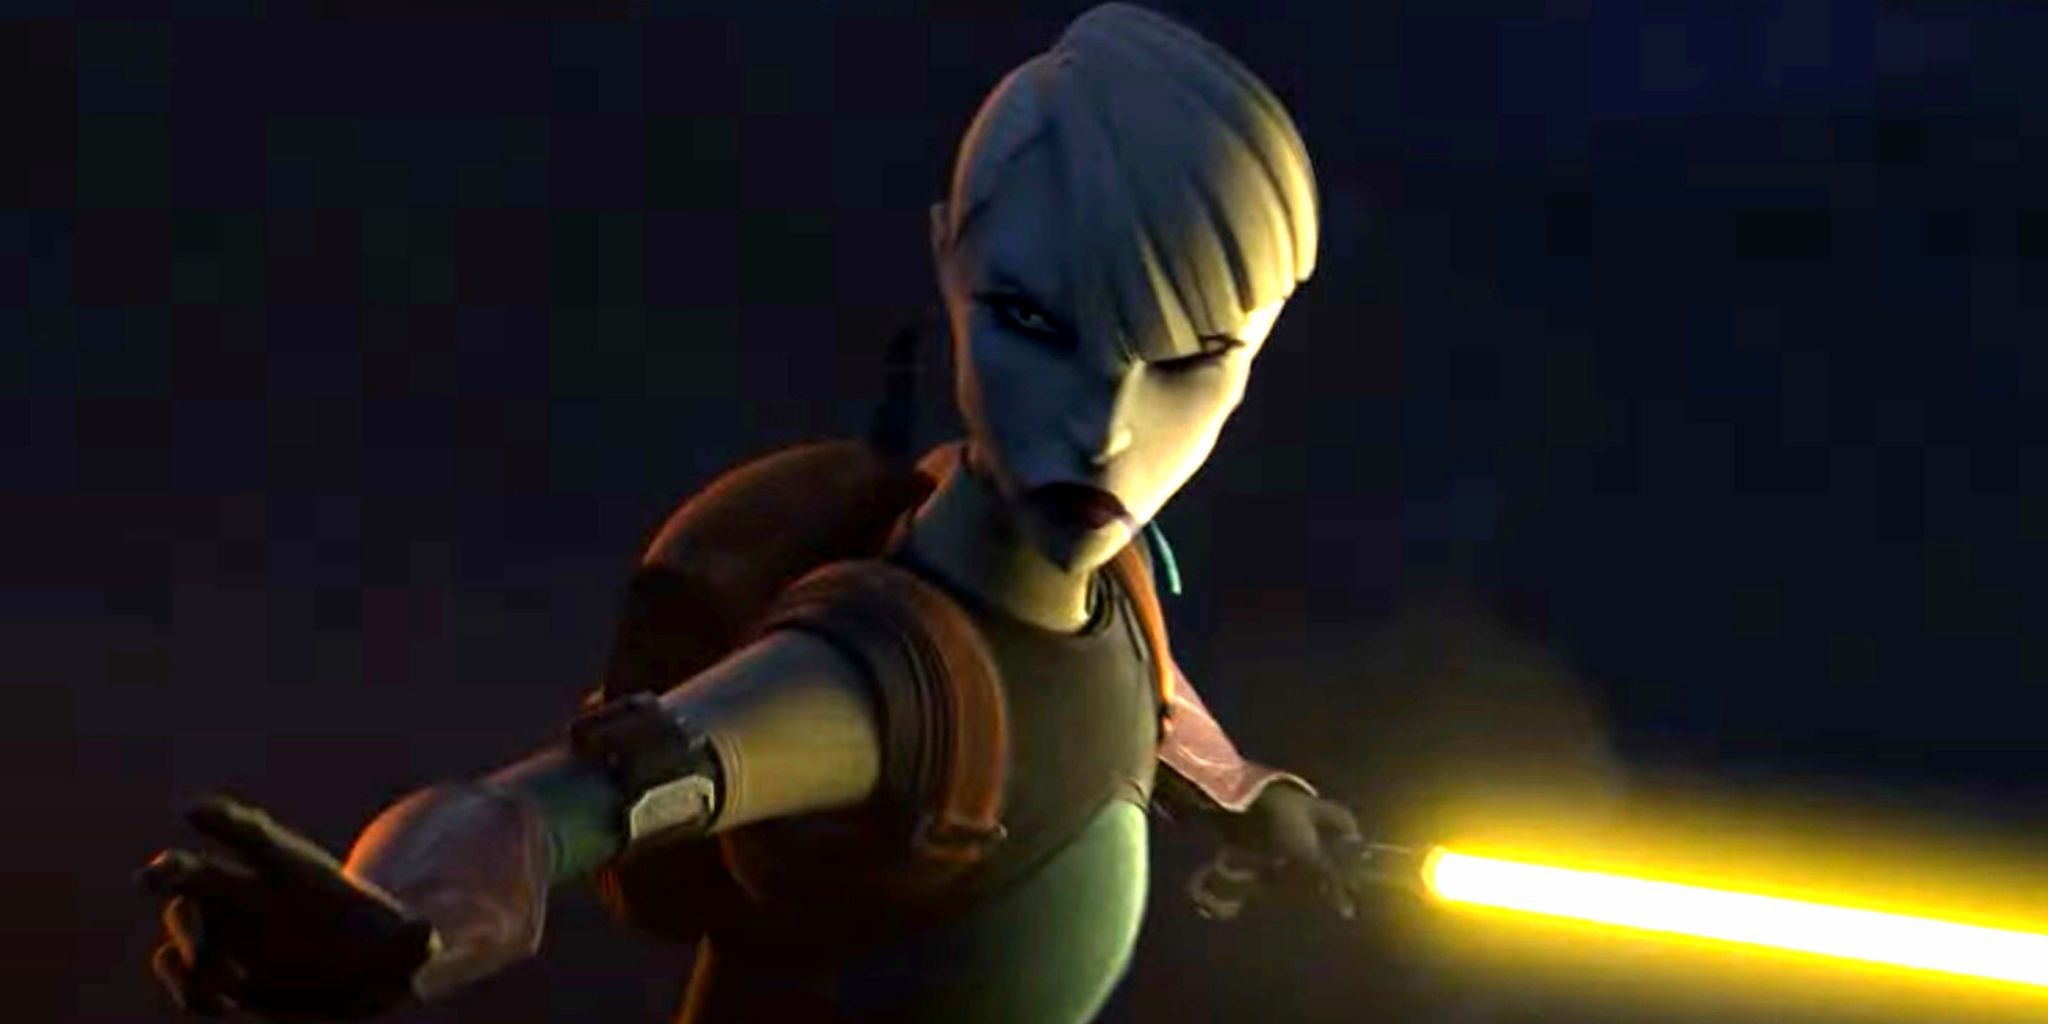 Asajj Ventress returns with a yellow lightsaber in the trailer for Star Wars: The Bad Batch season 3